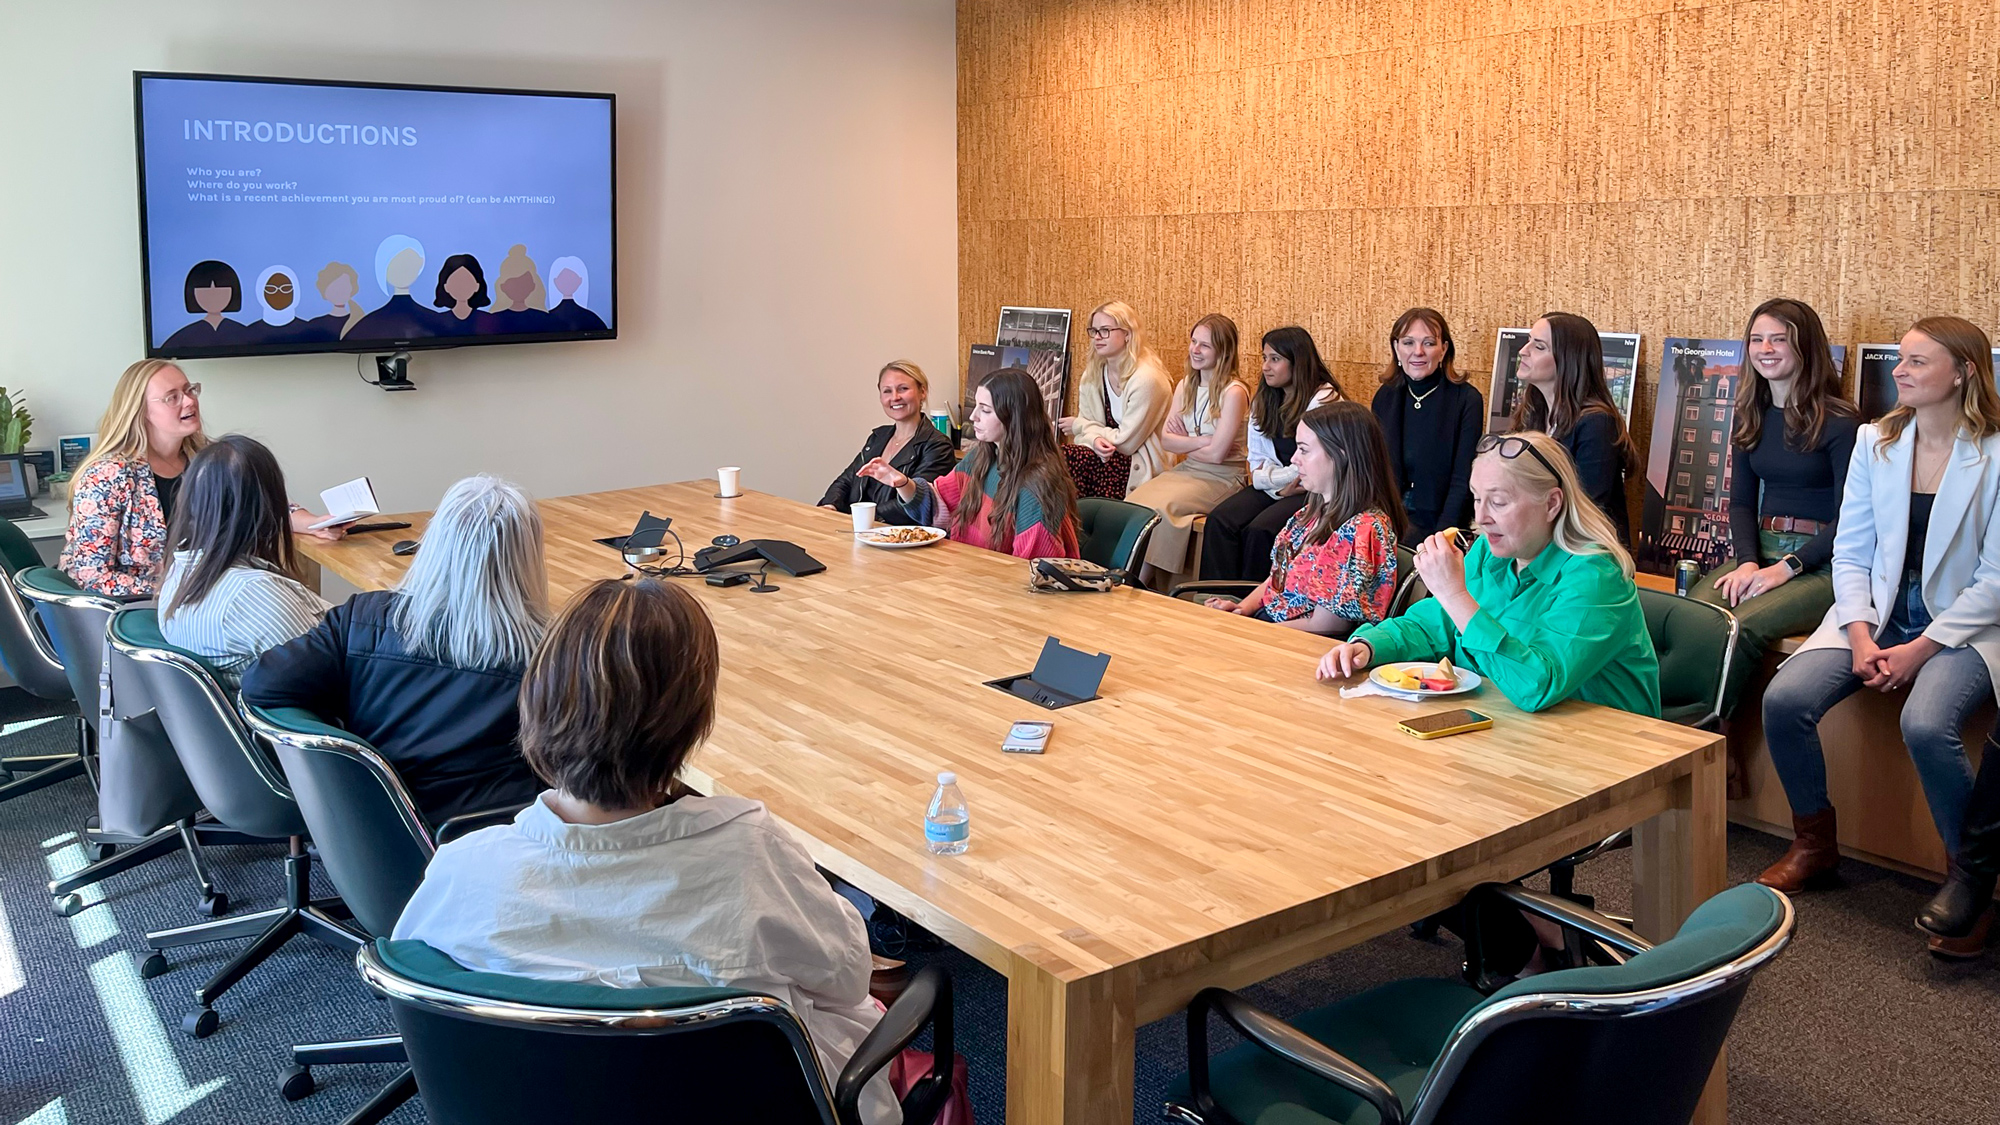 A group of women in a business meeting, engaging in introductions with a slide on the monitor, in a room with a large wooden table and a cork wall, likely celebrating International Women's Day.